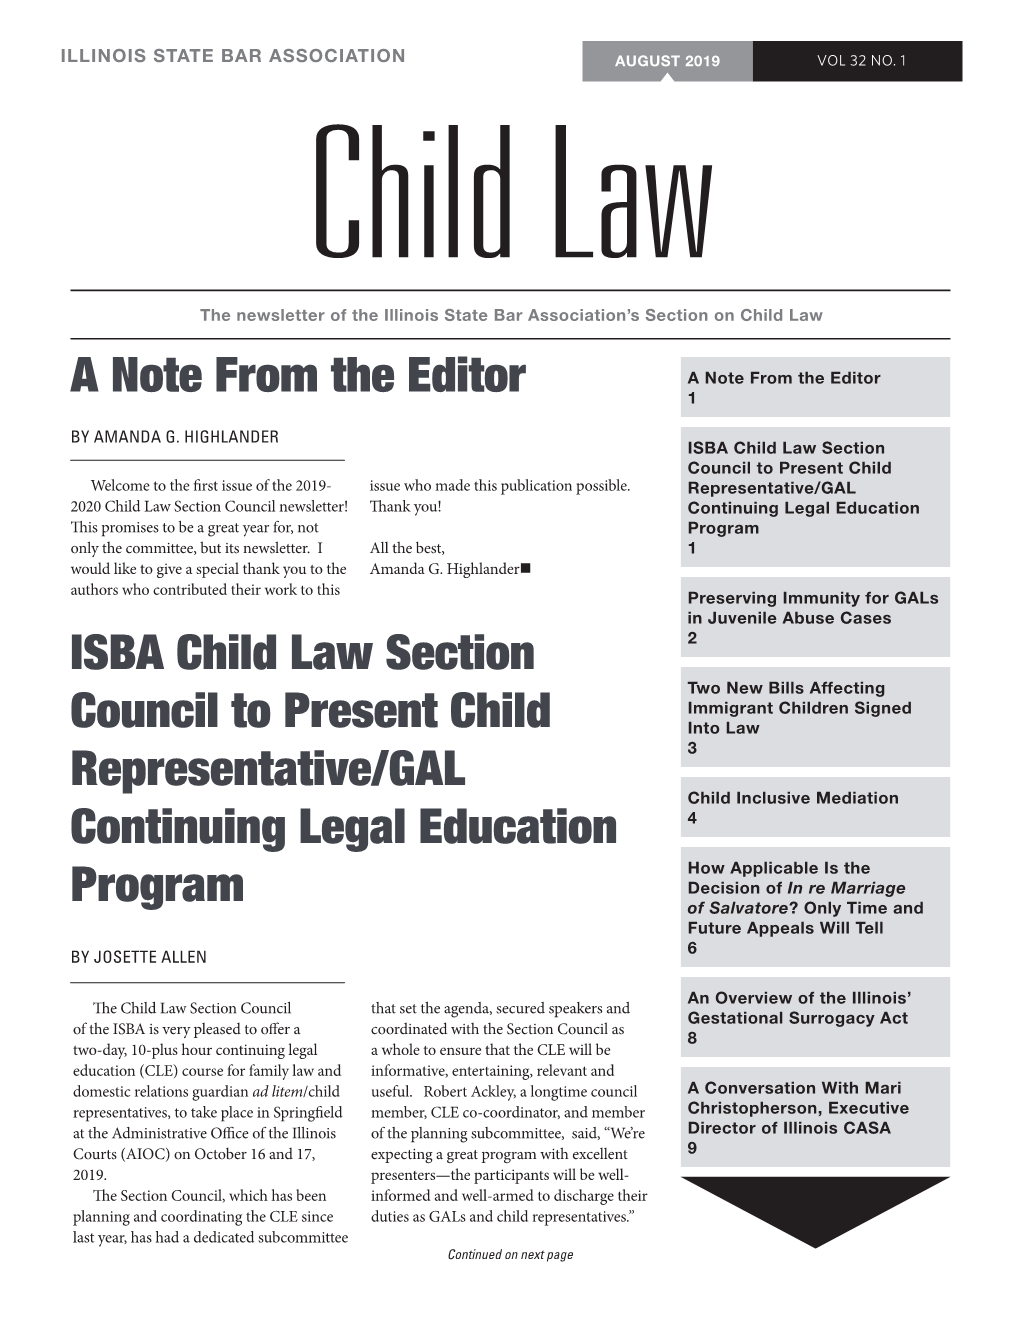 ISBA Child Law Section Council to Present Child Representative/GAL